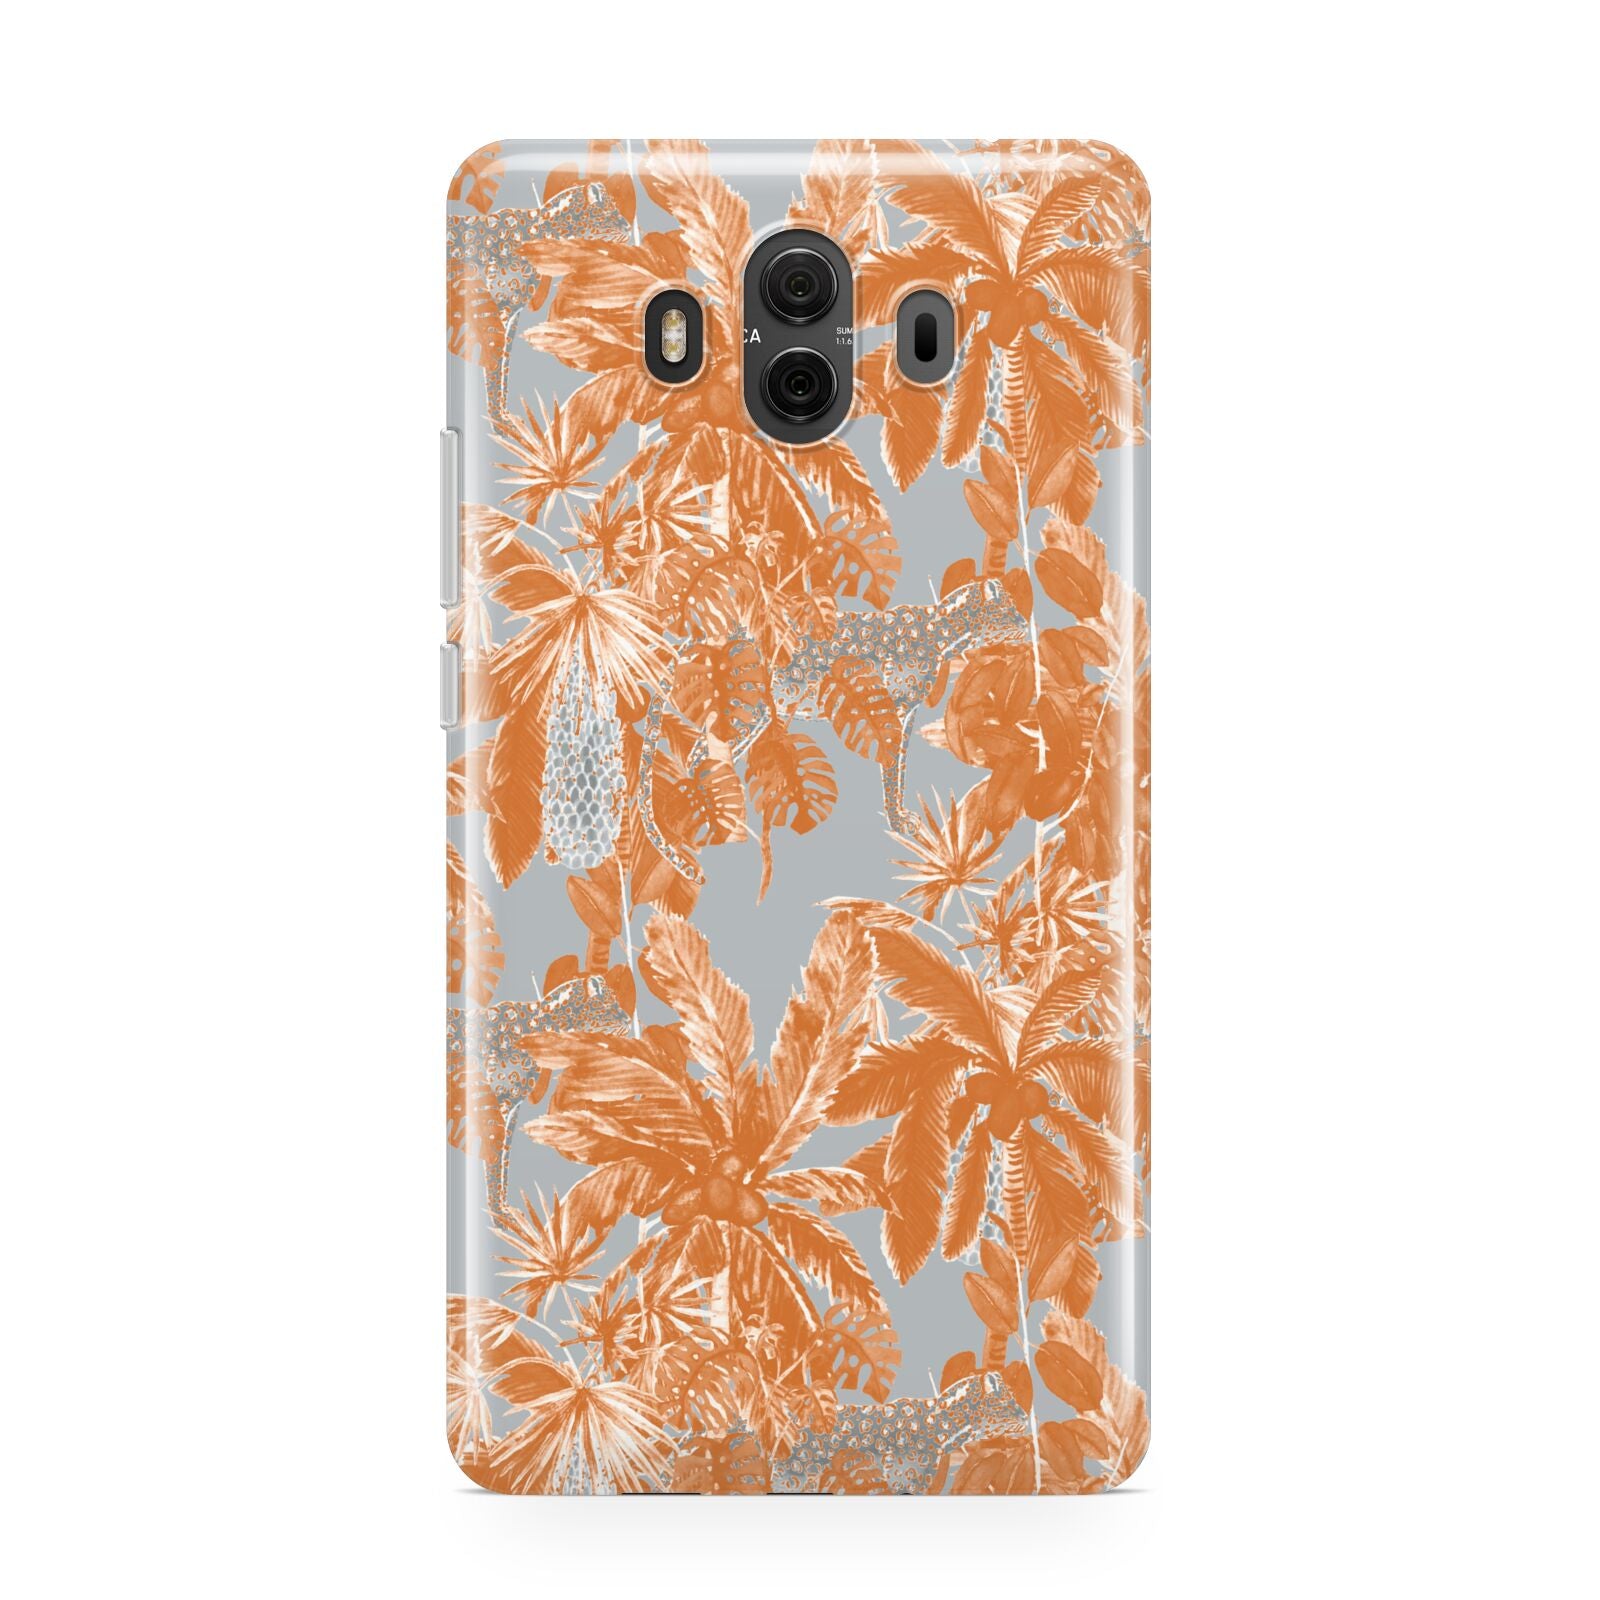 Tropical Huawei Mate 10 Protective Phone Case